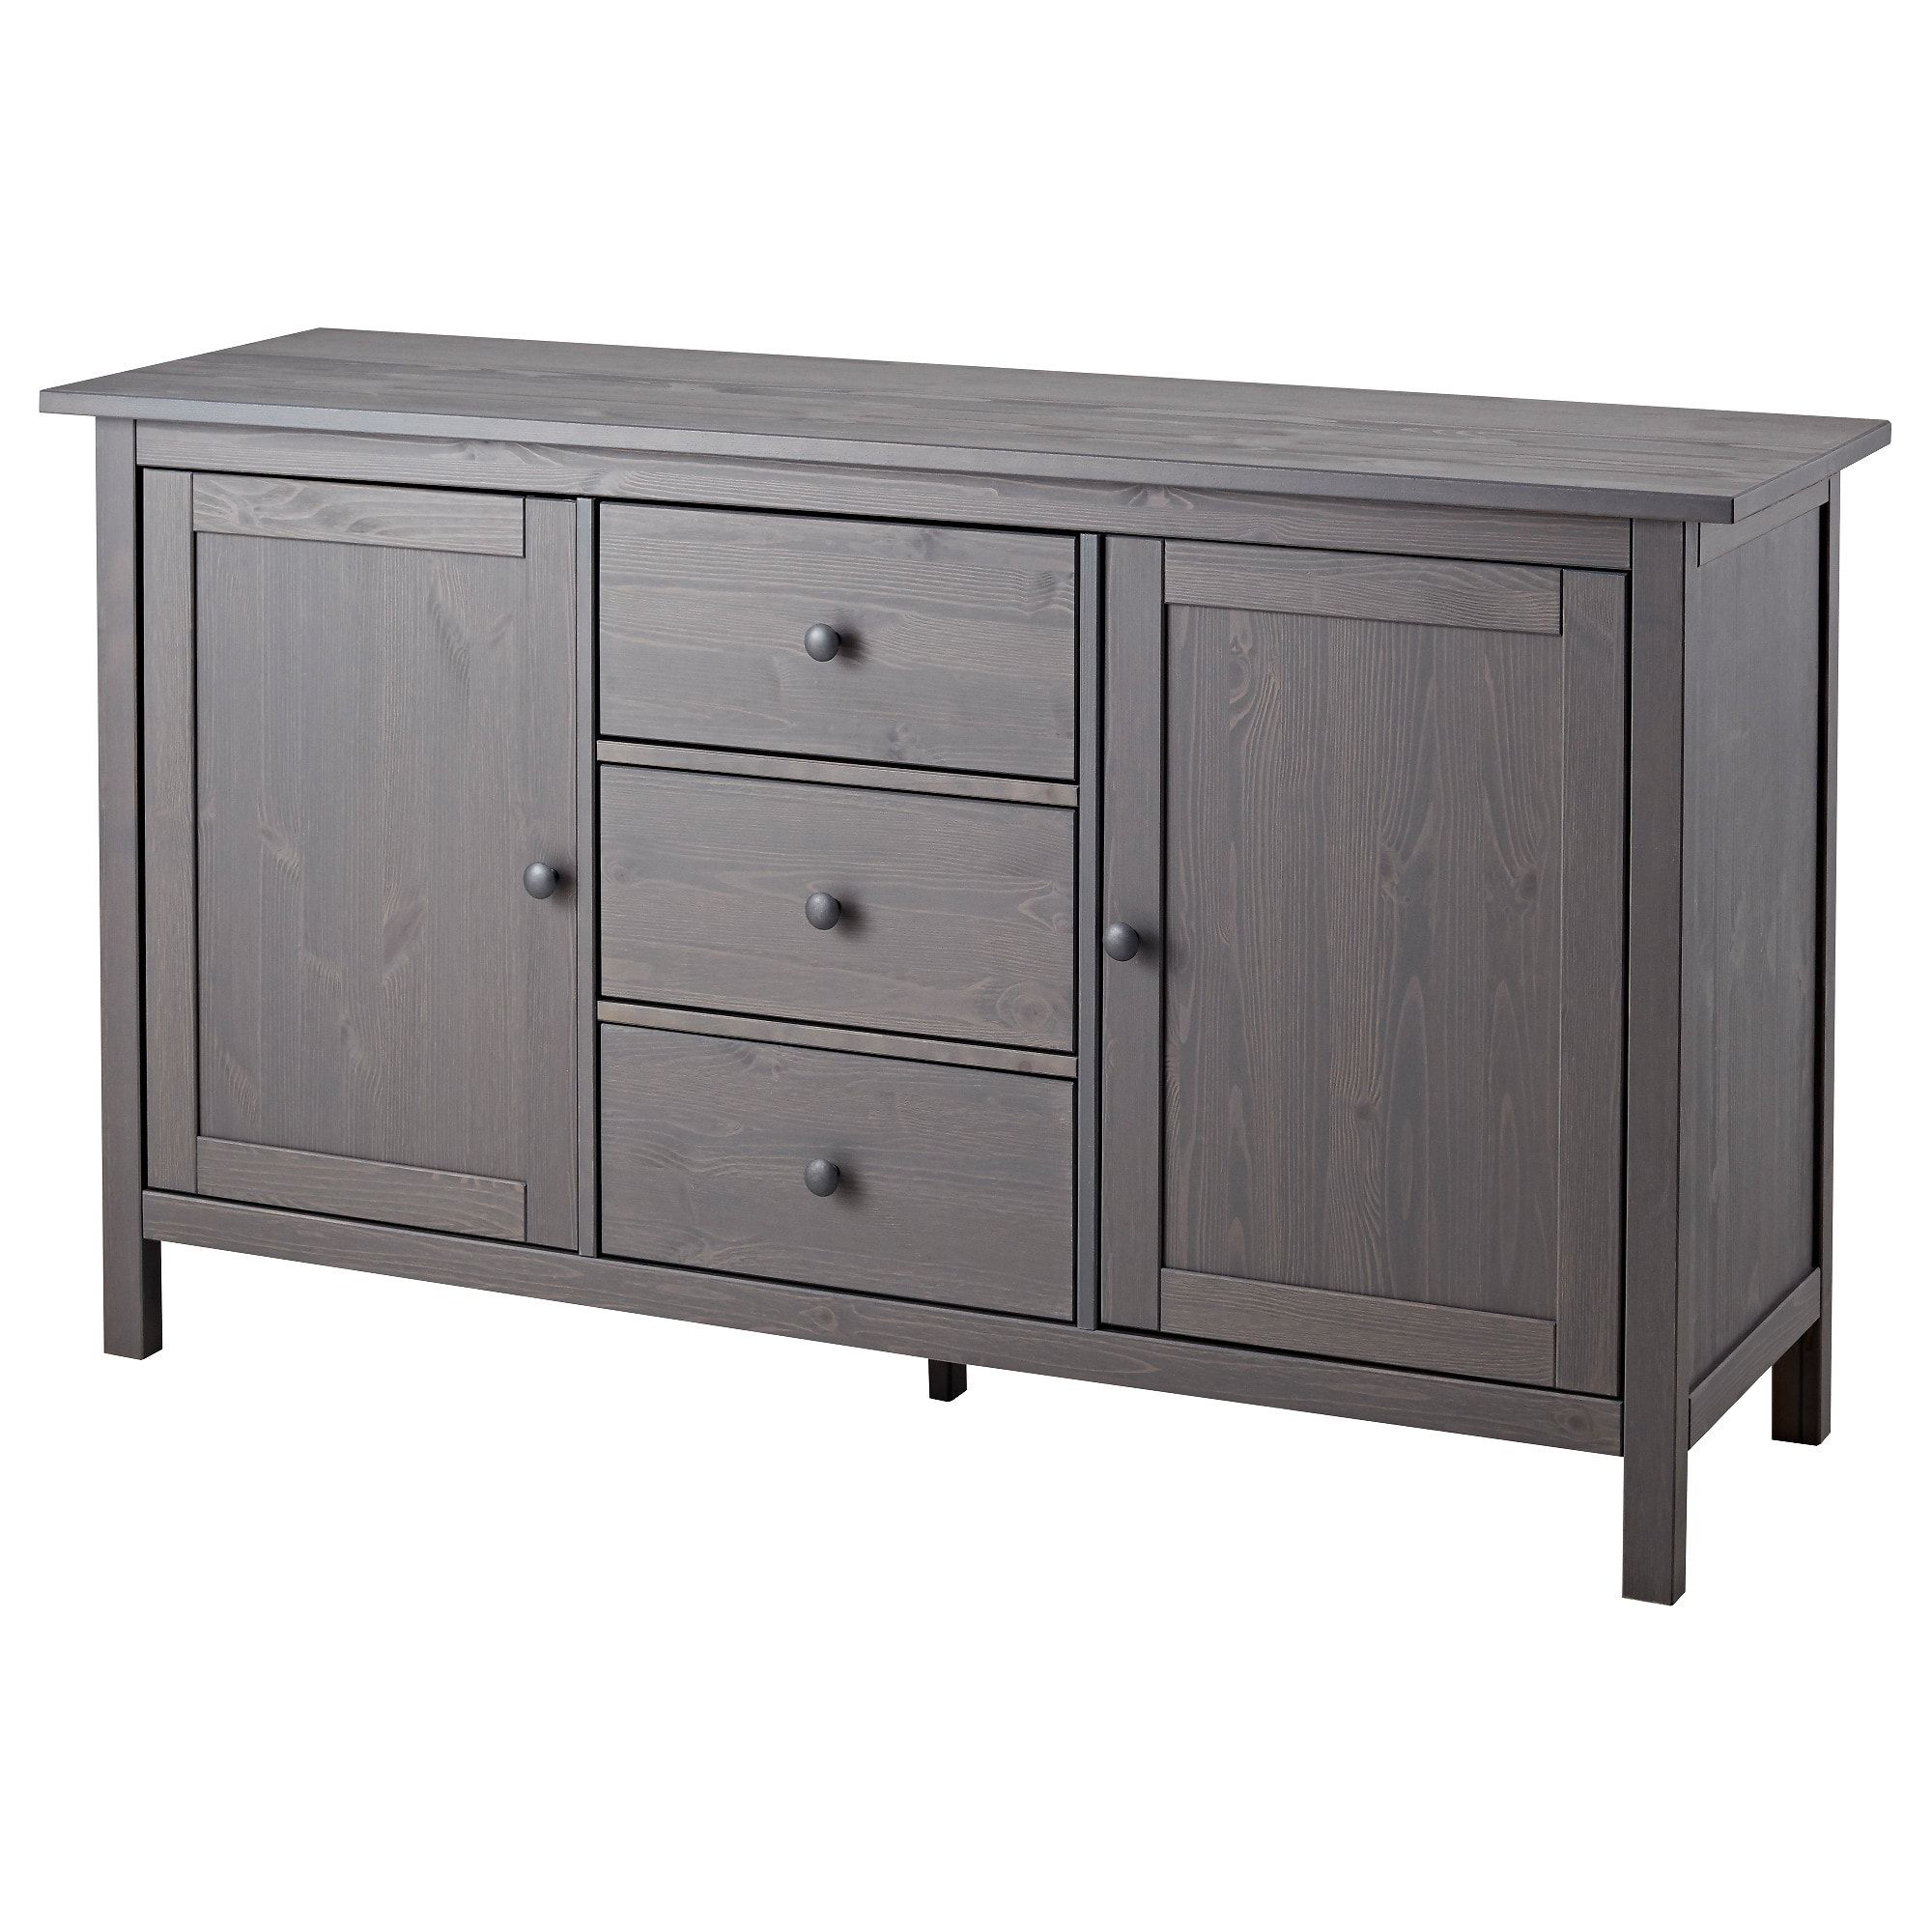 Hemnes Sideboard, Dark Gray Stained Inside Recent North York Sideboards (View 10 of 20)